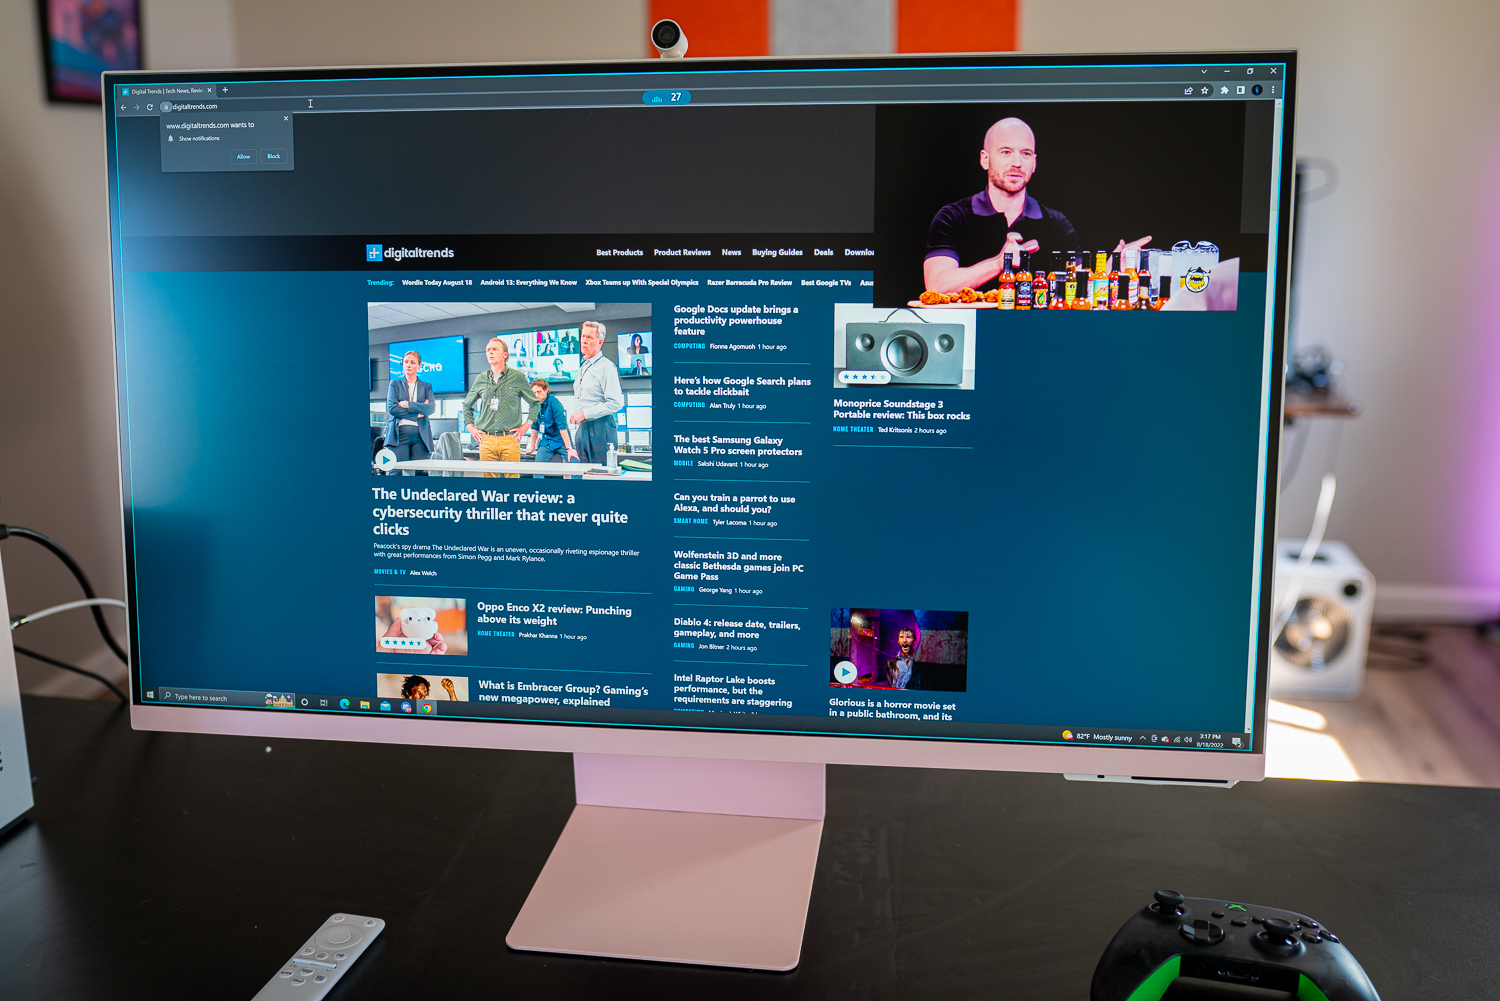 how i use samsung m8 monitor for work, content creation & productivity